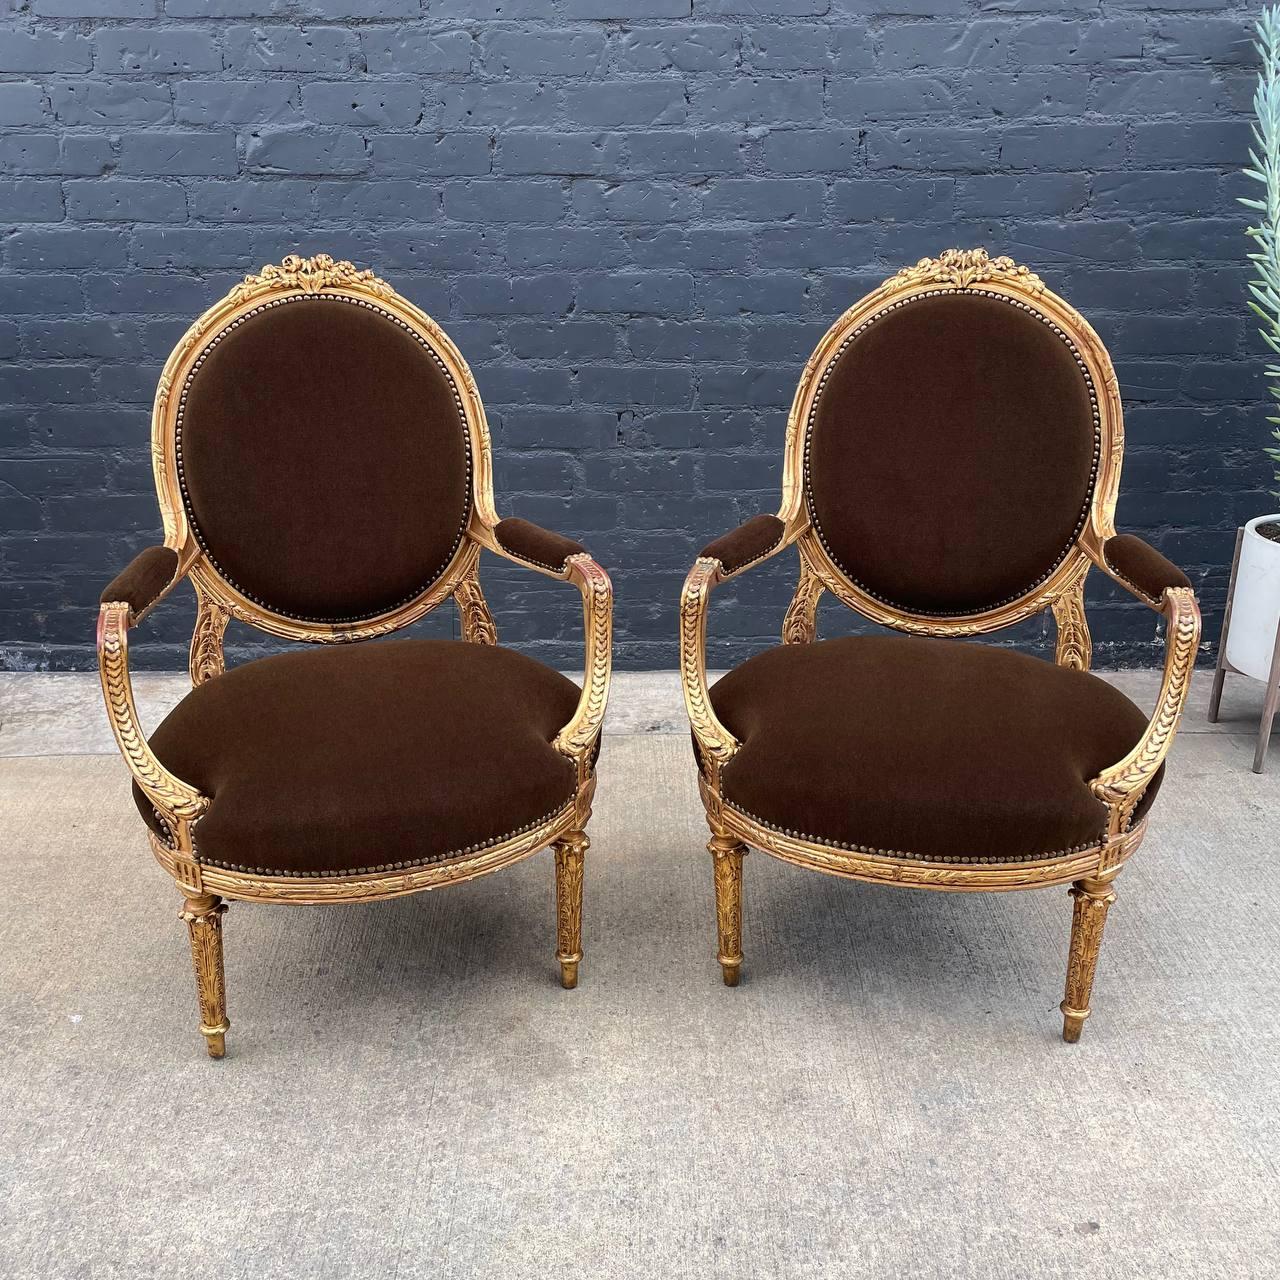 Pair of French Neoclassical-Style Giltwood Armchairs 

Country: France
Materials: Carved Gold-Leaf Wood, New Alpaca Mohair 
Condition: Newly Reupholstered, New Alpaca Mohair 
Style: French Neoclassical 
Year: 1920’s

$7,895 pair

Dimensions: 
44”H x